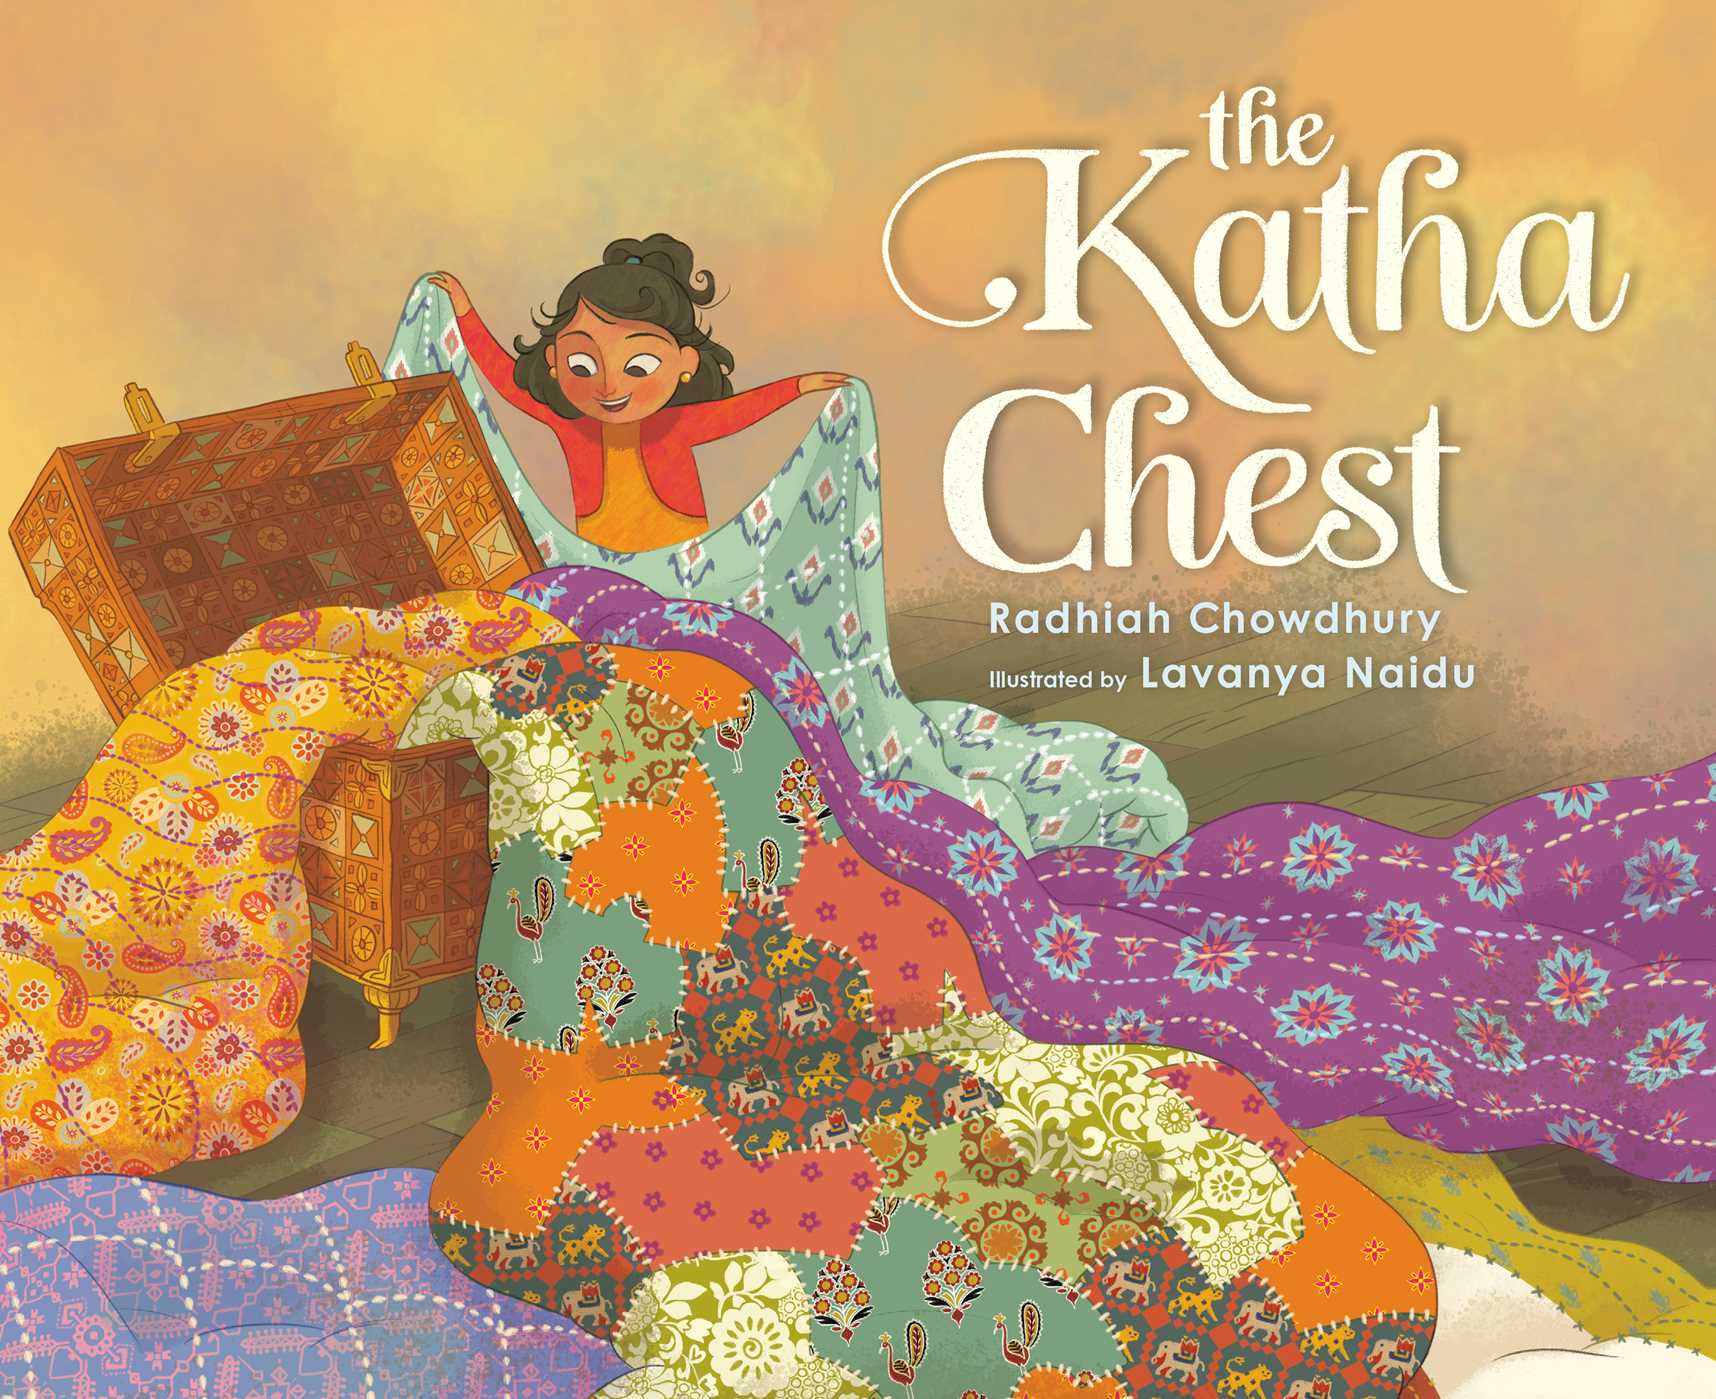 Image for "The Katha Chest"